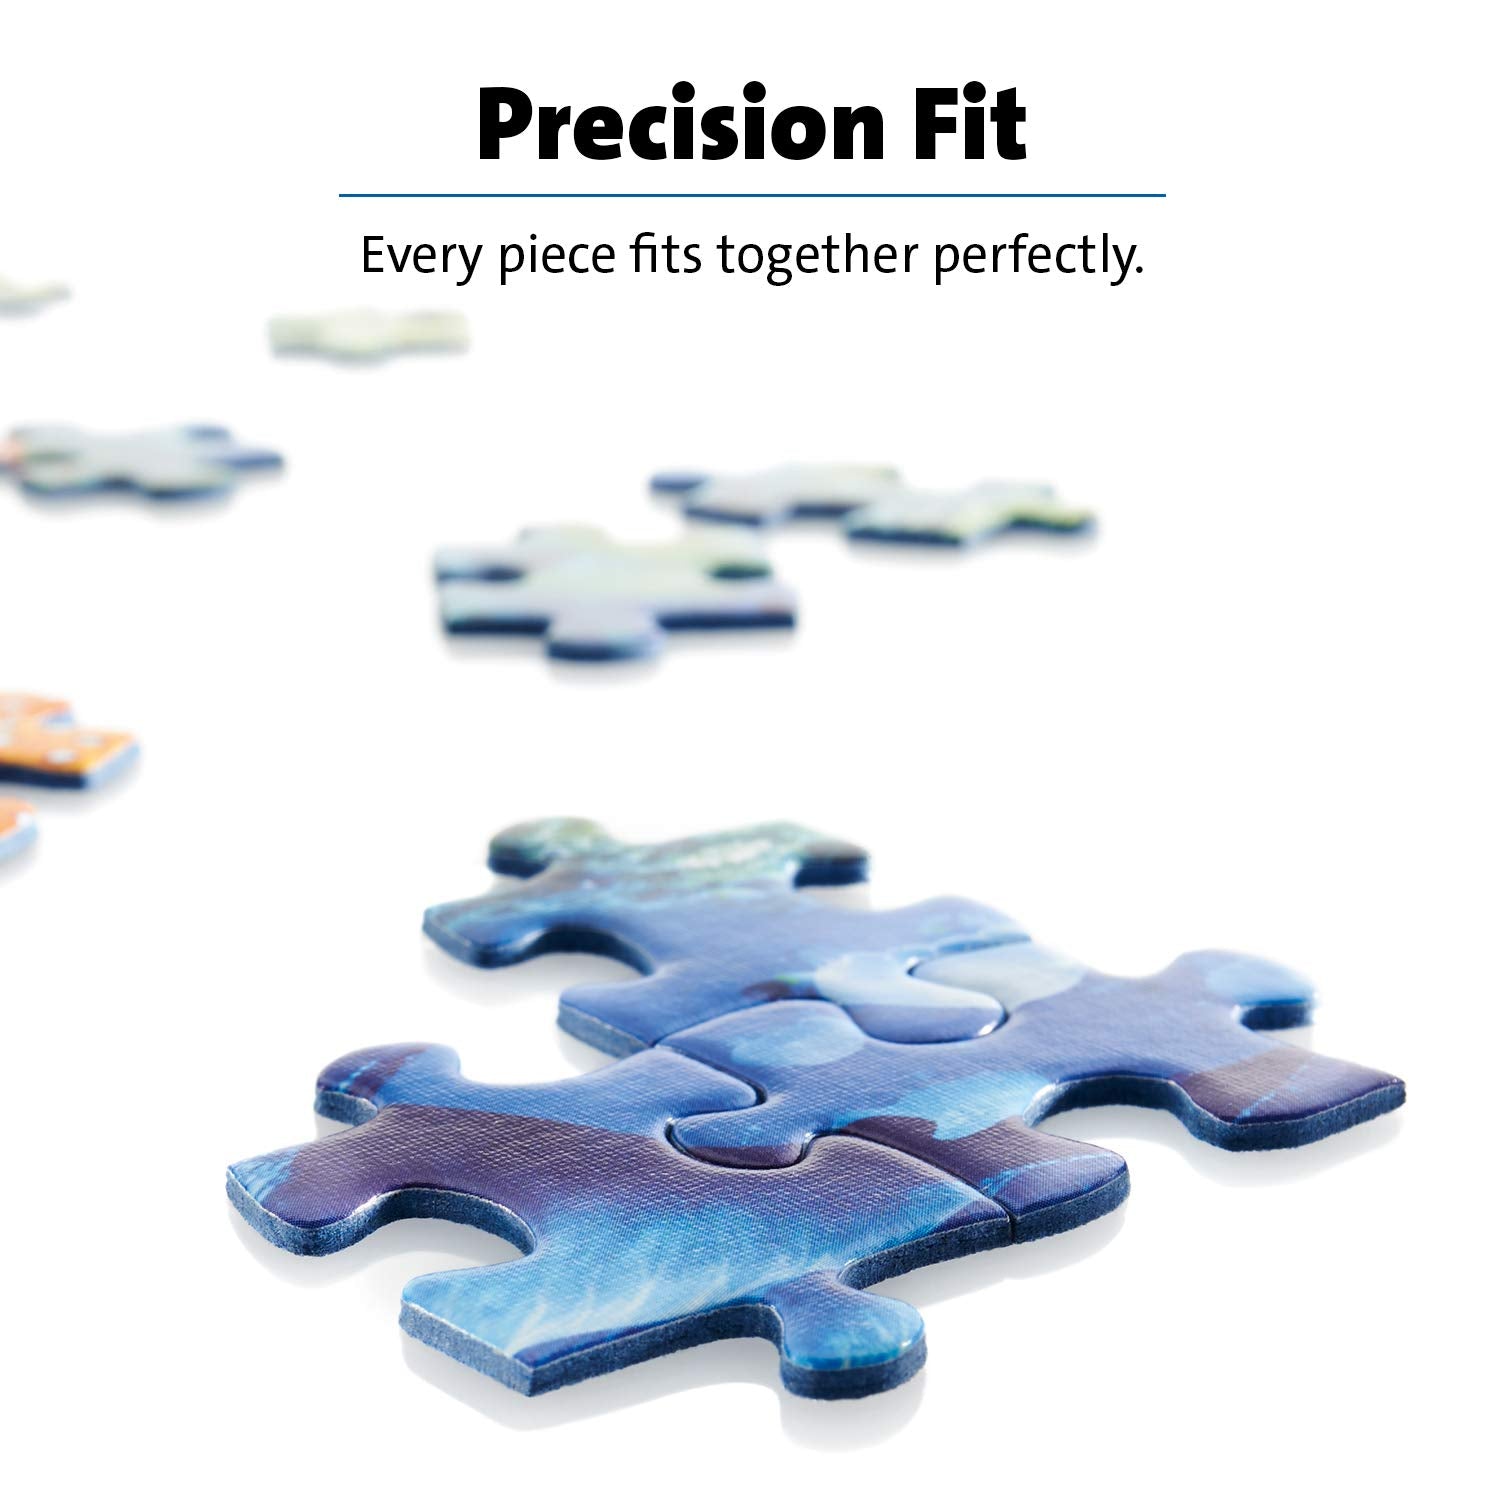 Ravensburger Construction Crowd - 60 Piece Jigsaw Puzzle for Kids – Every Piece is Unique, Pieces Fit Together Perfectly